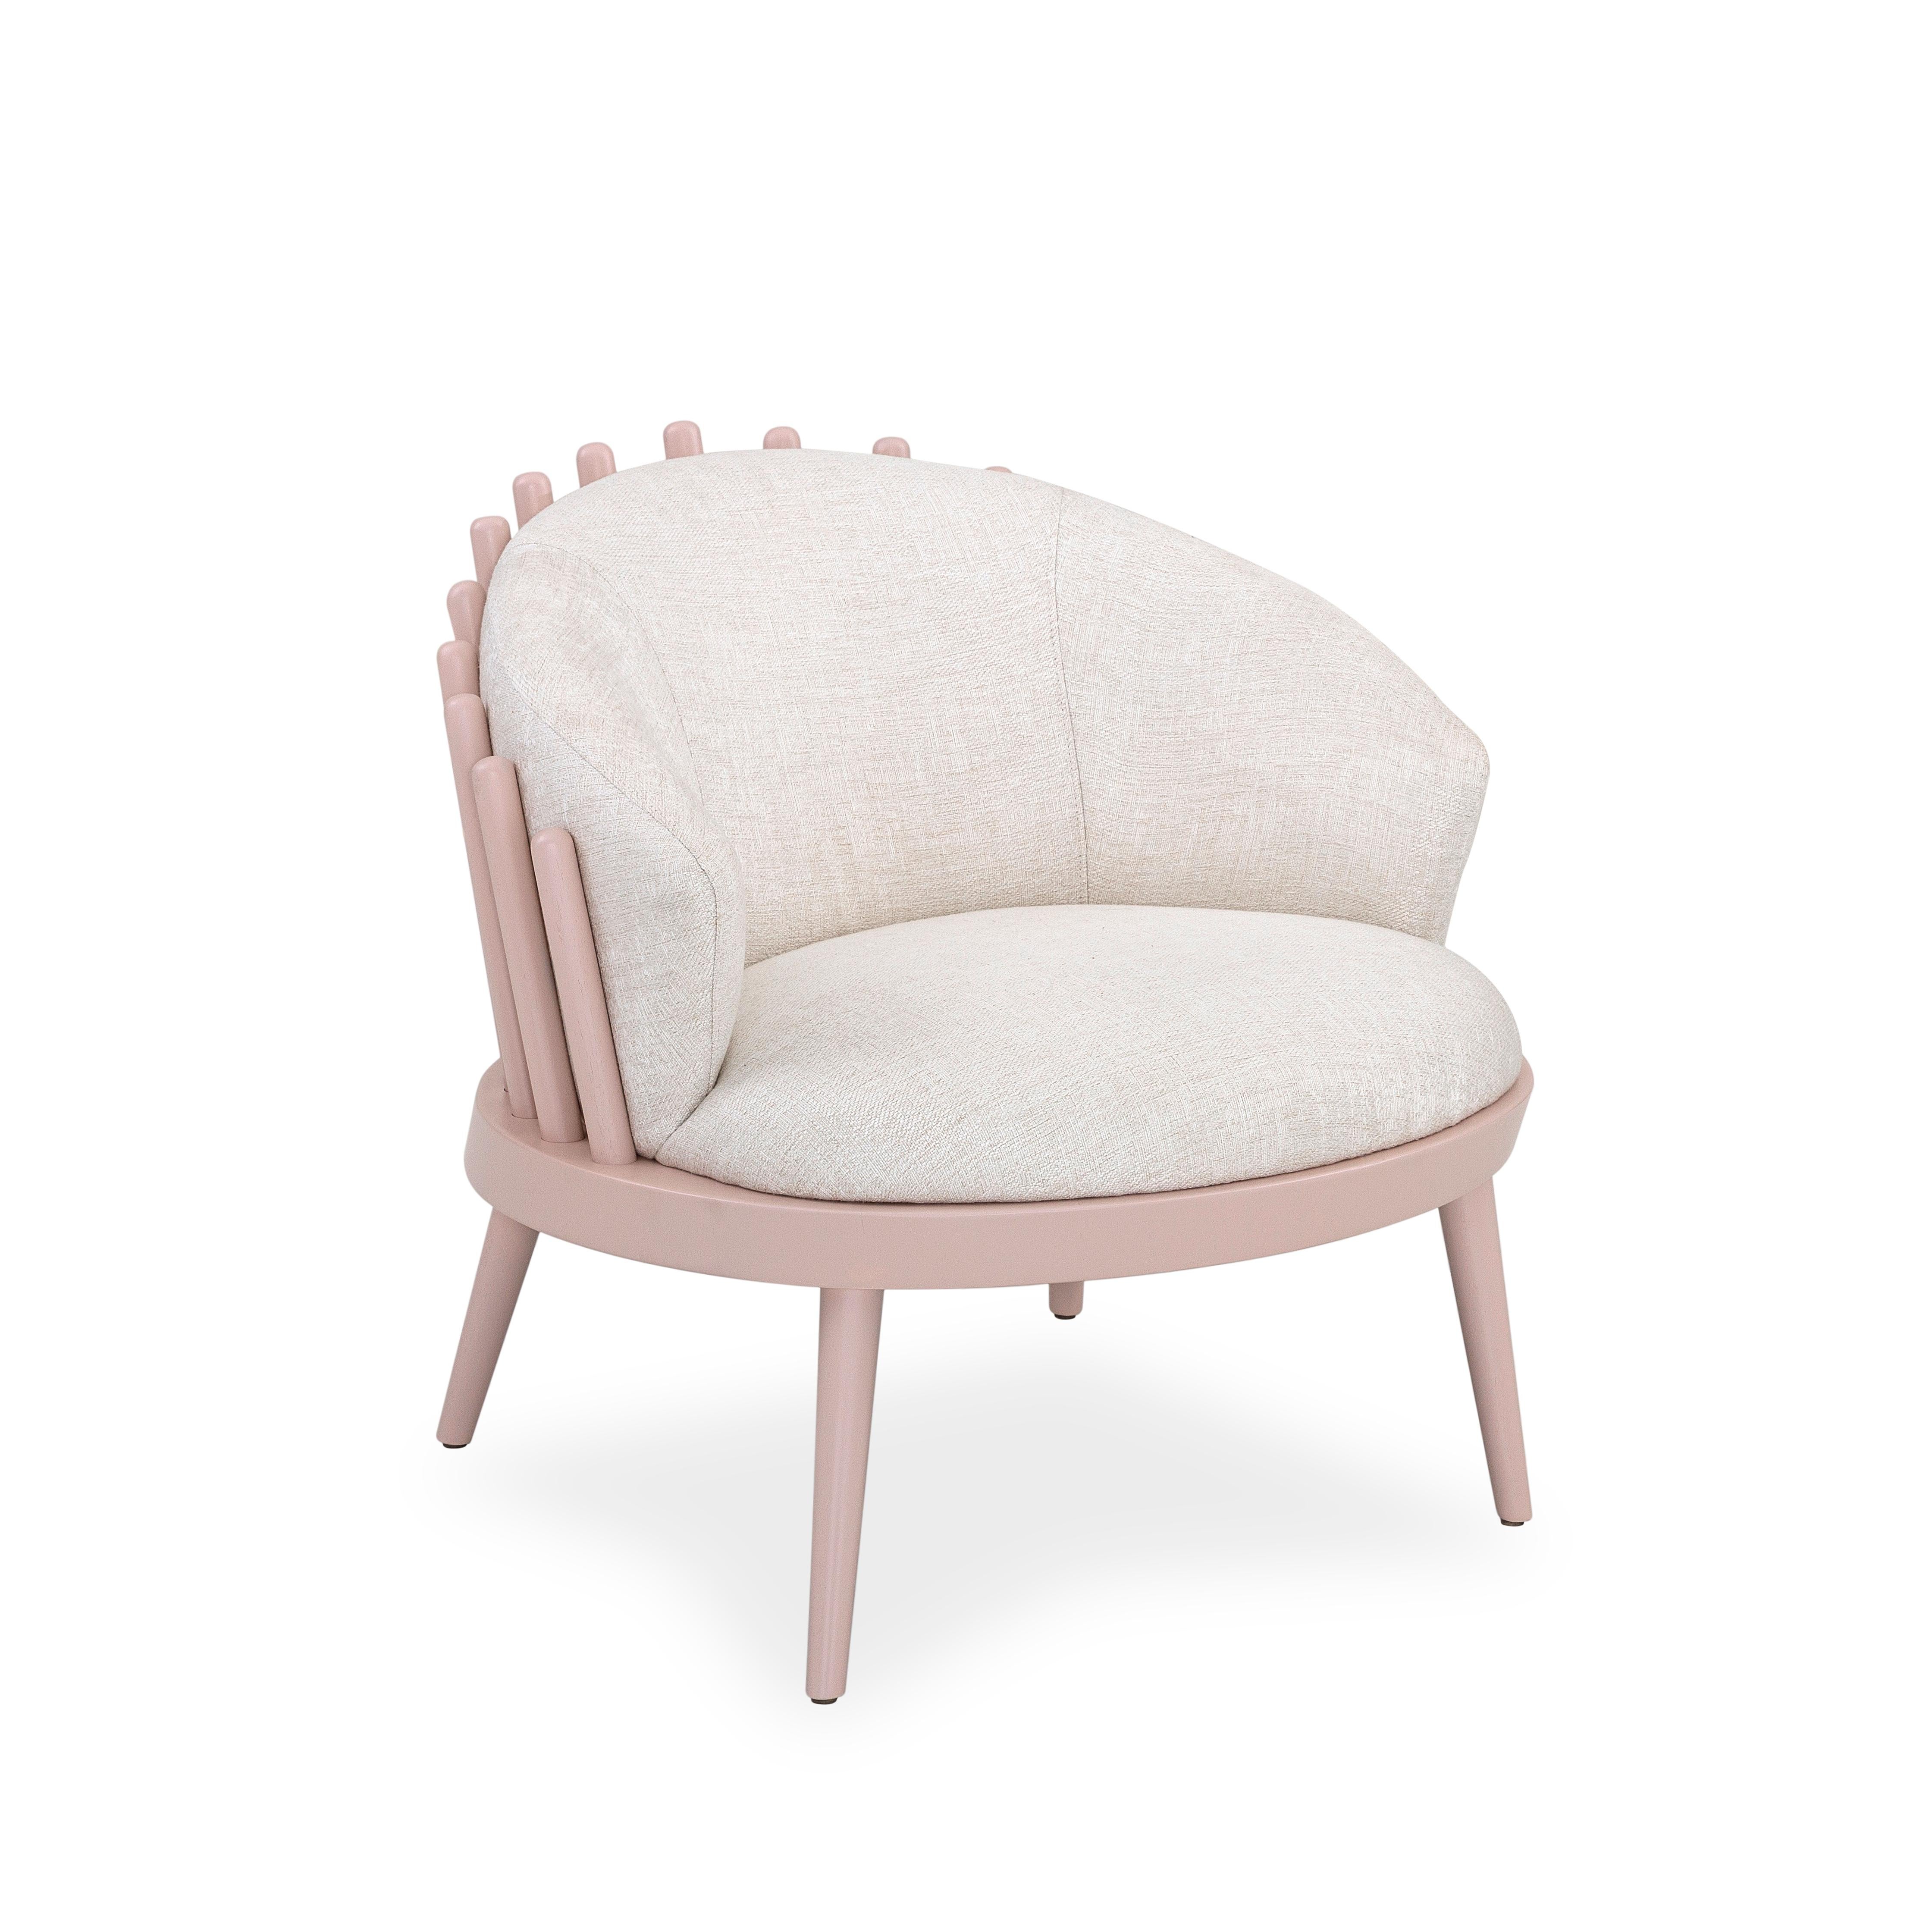 tyley upholstered chair